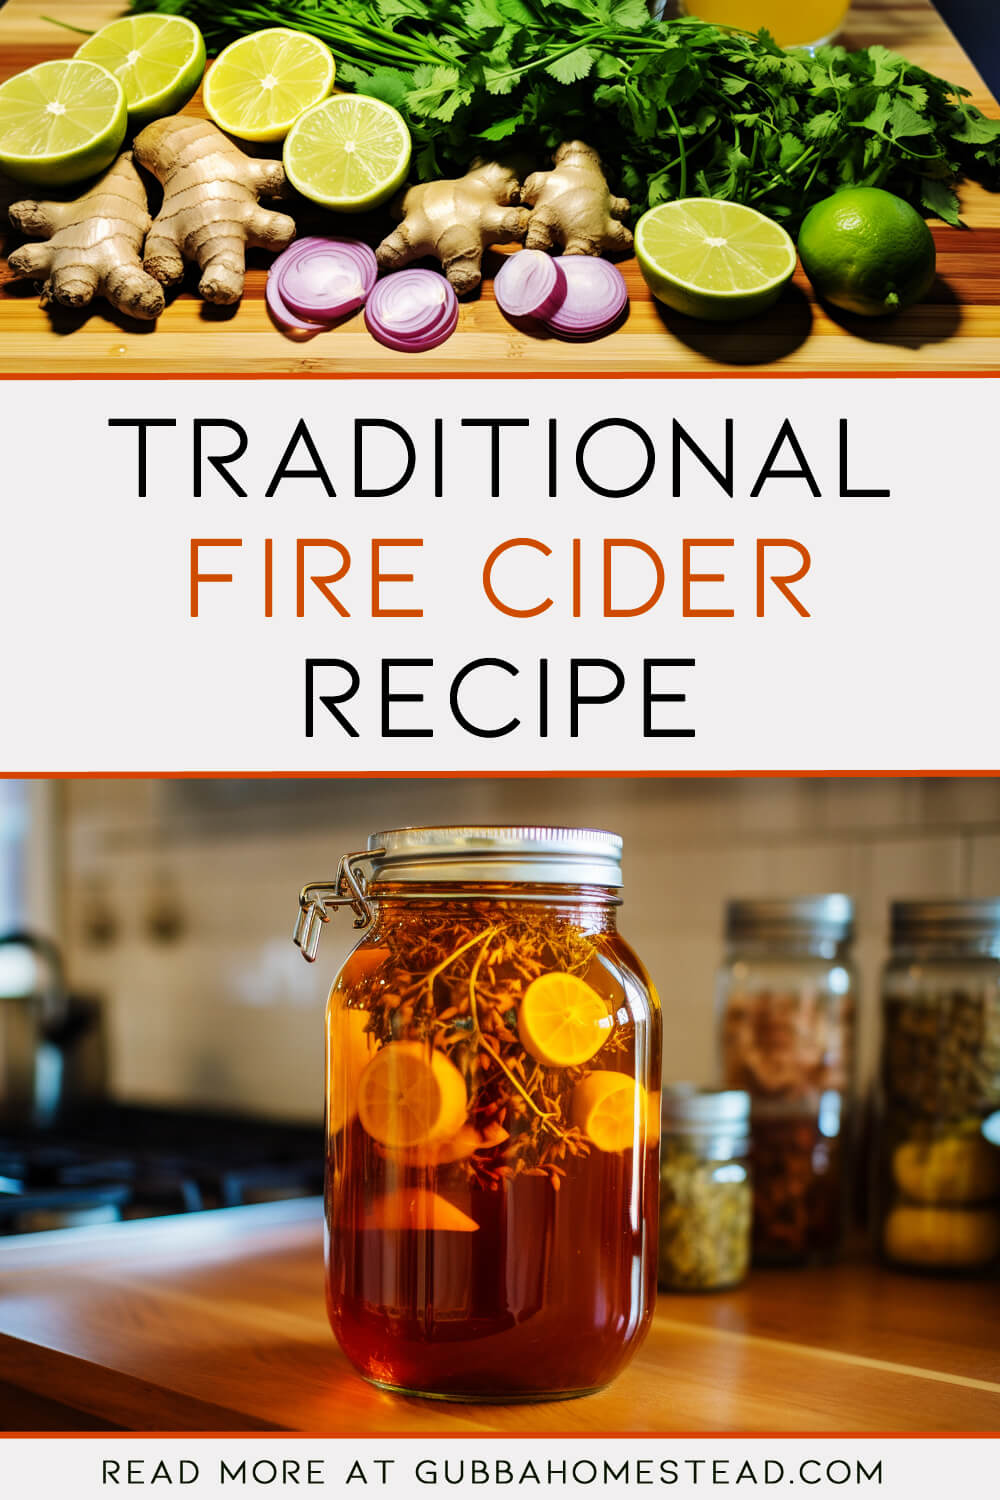 Traditional Fire Cider Recipe: Benefits and Guide